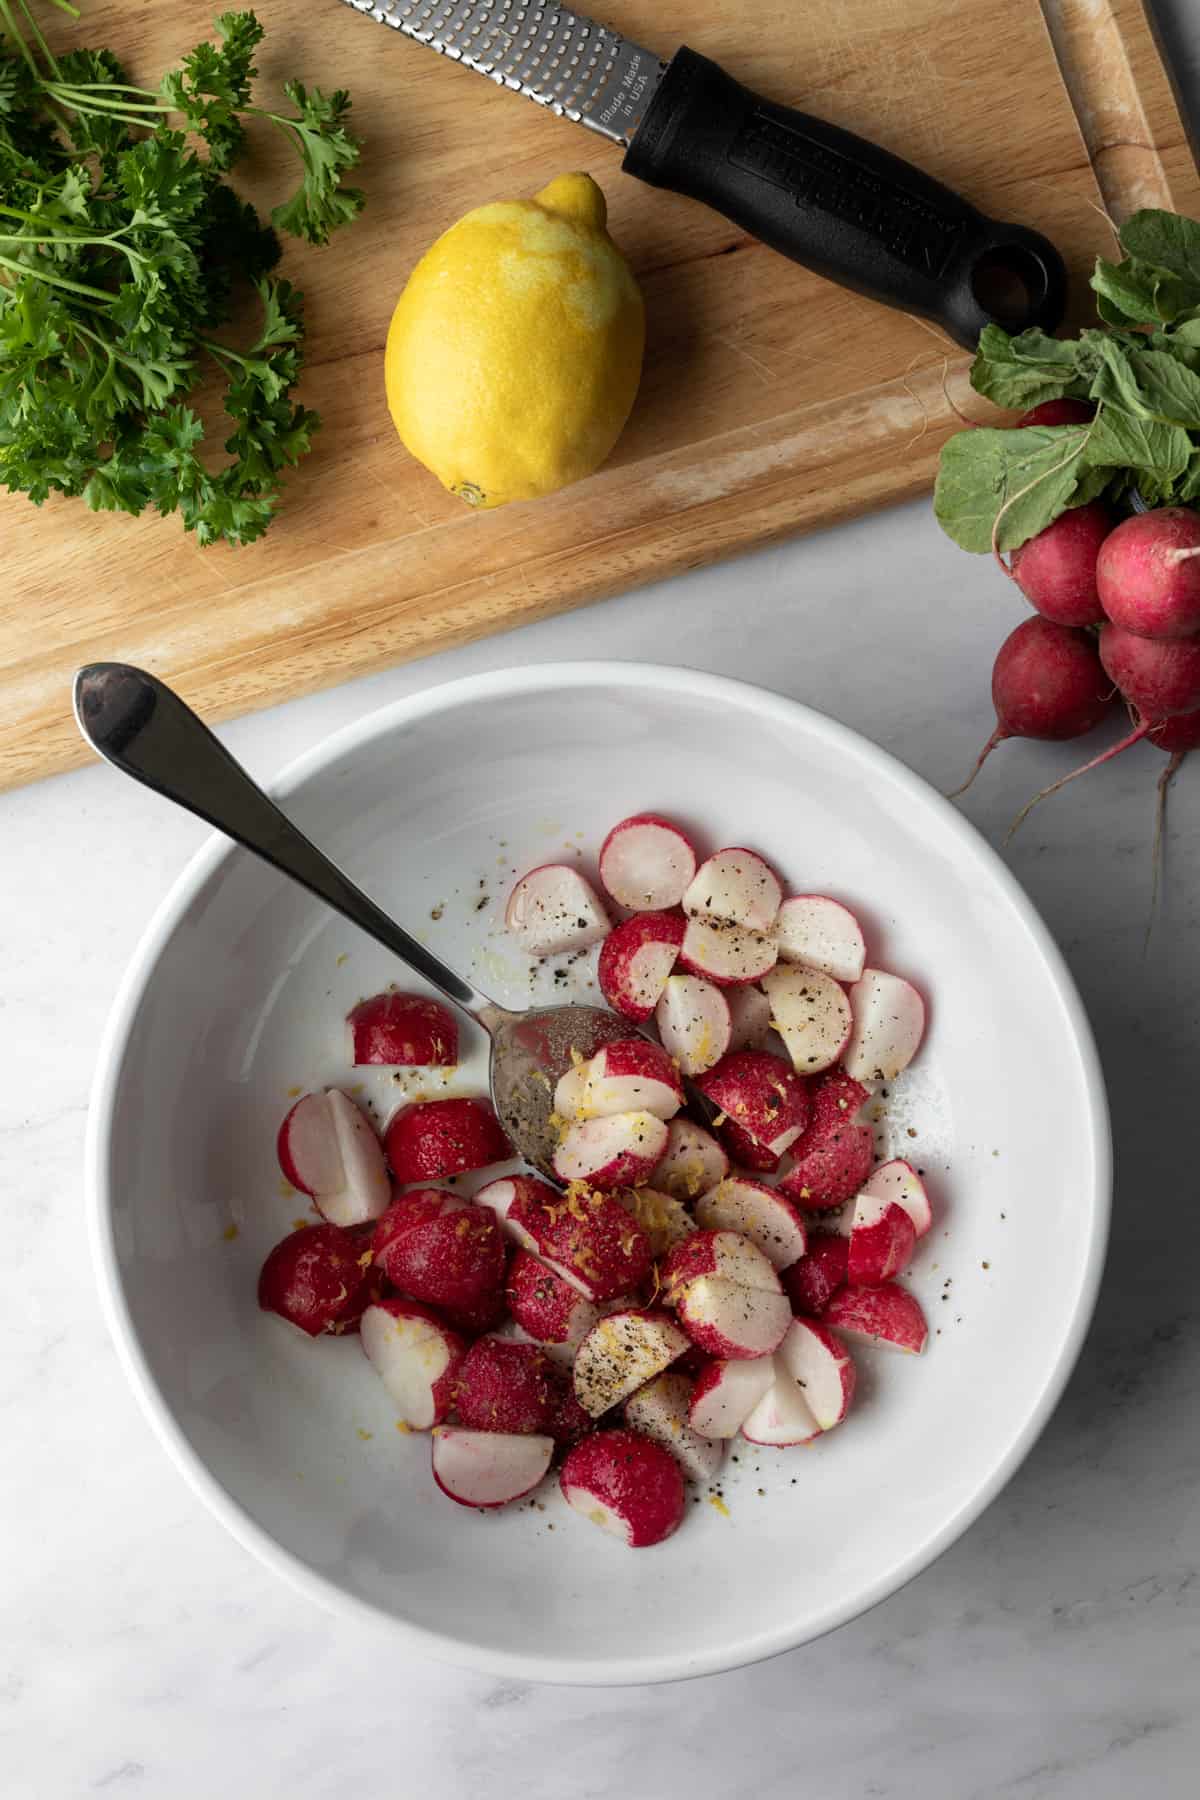 trimmed radishes in a large white bowl being tossed with oil, lemon zest, salt and pepper.